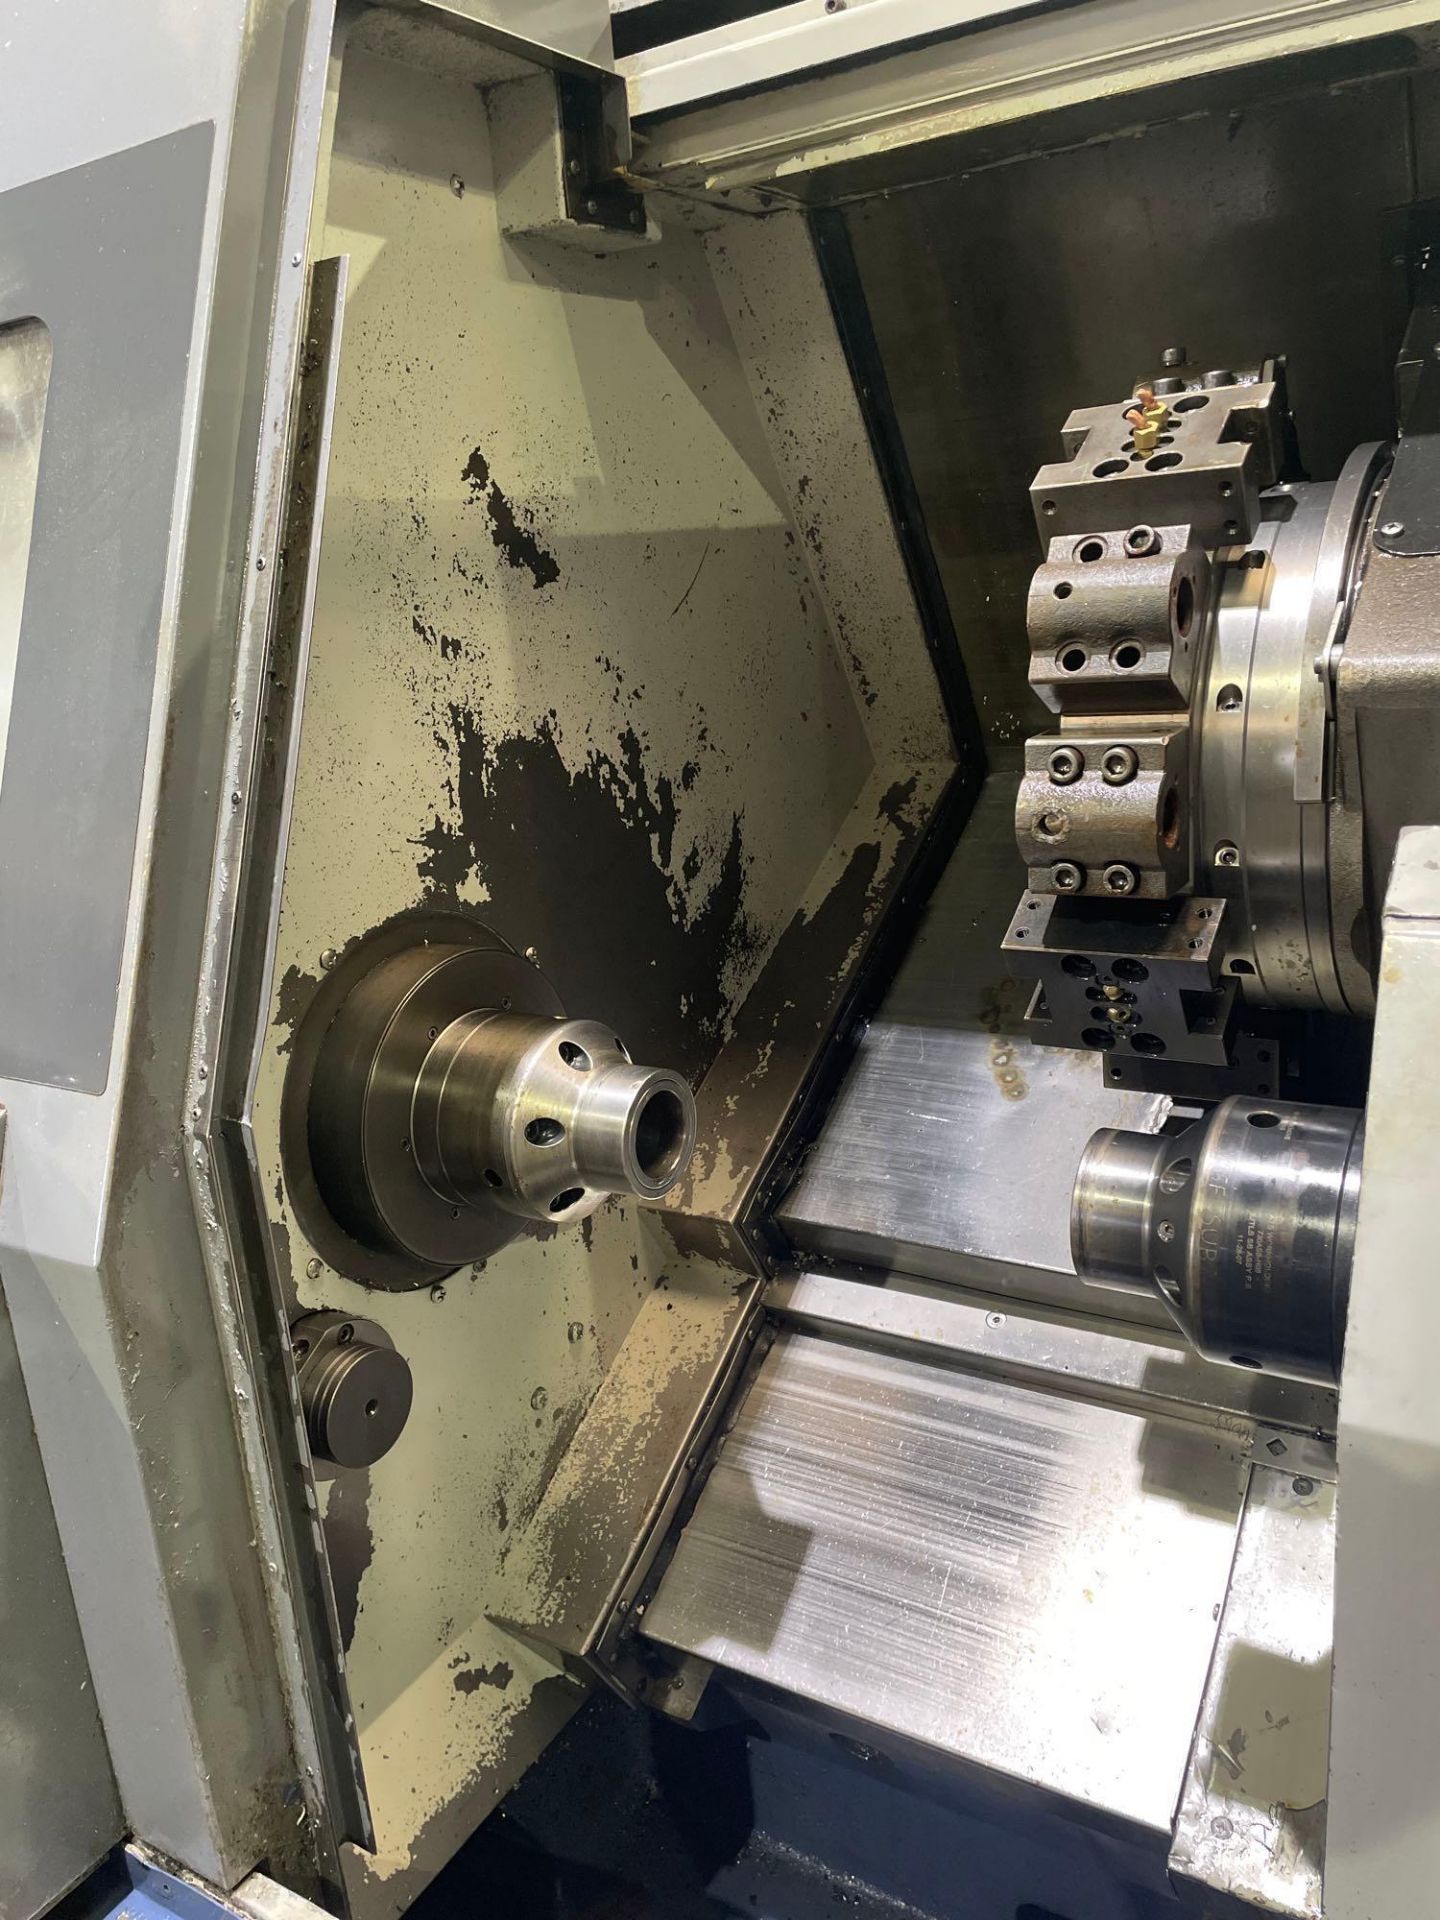 Mori Seiki SL-150S CNC Turning Center with Sub Spindle - Image 7 of 24